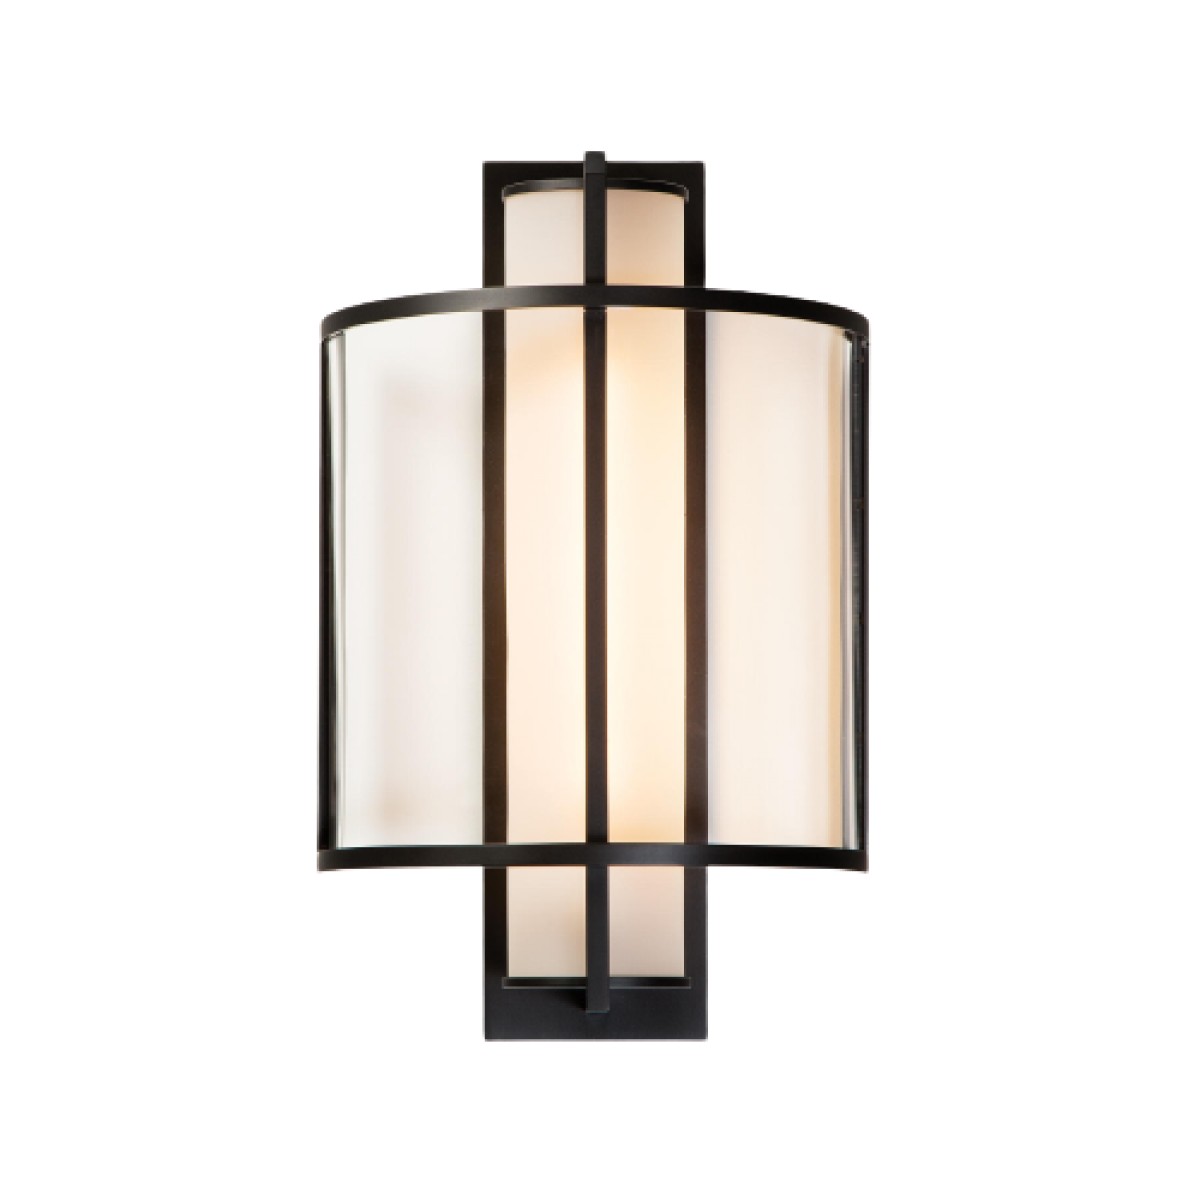 Halvdel Sconce (Outdoor Finish)